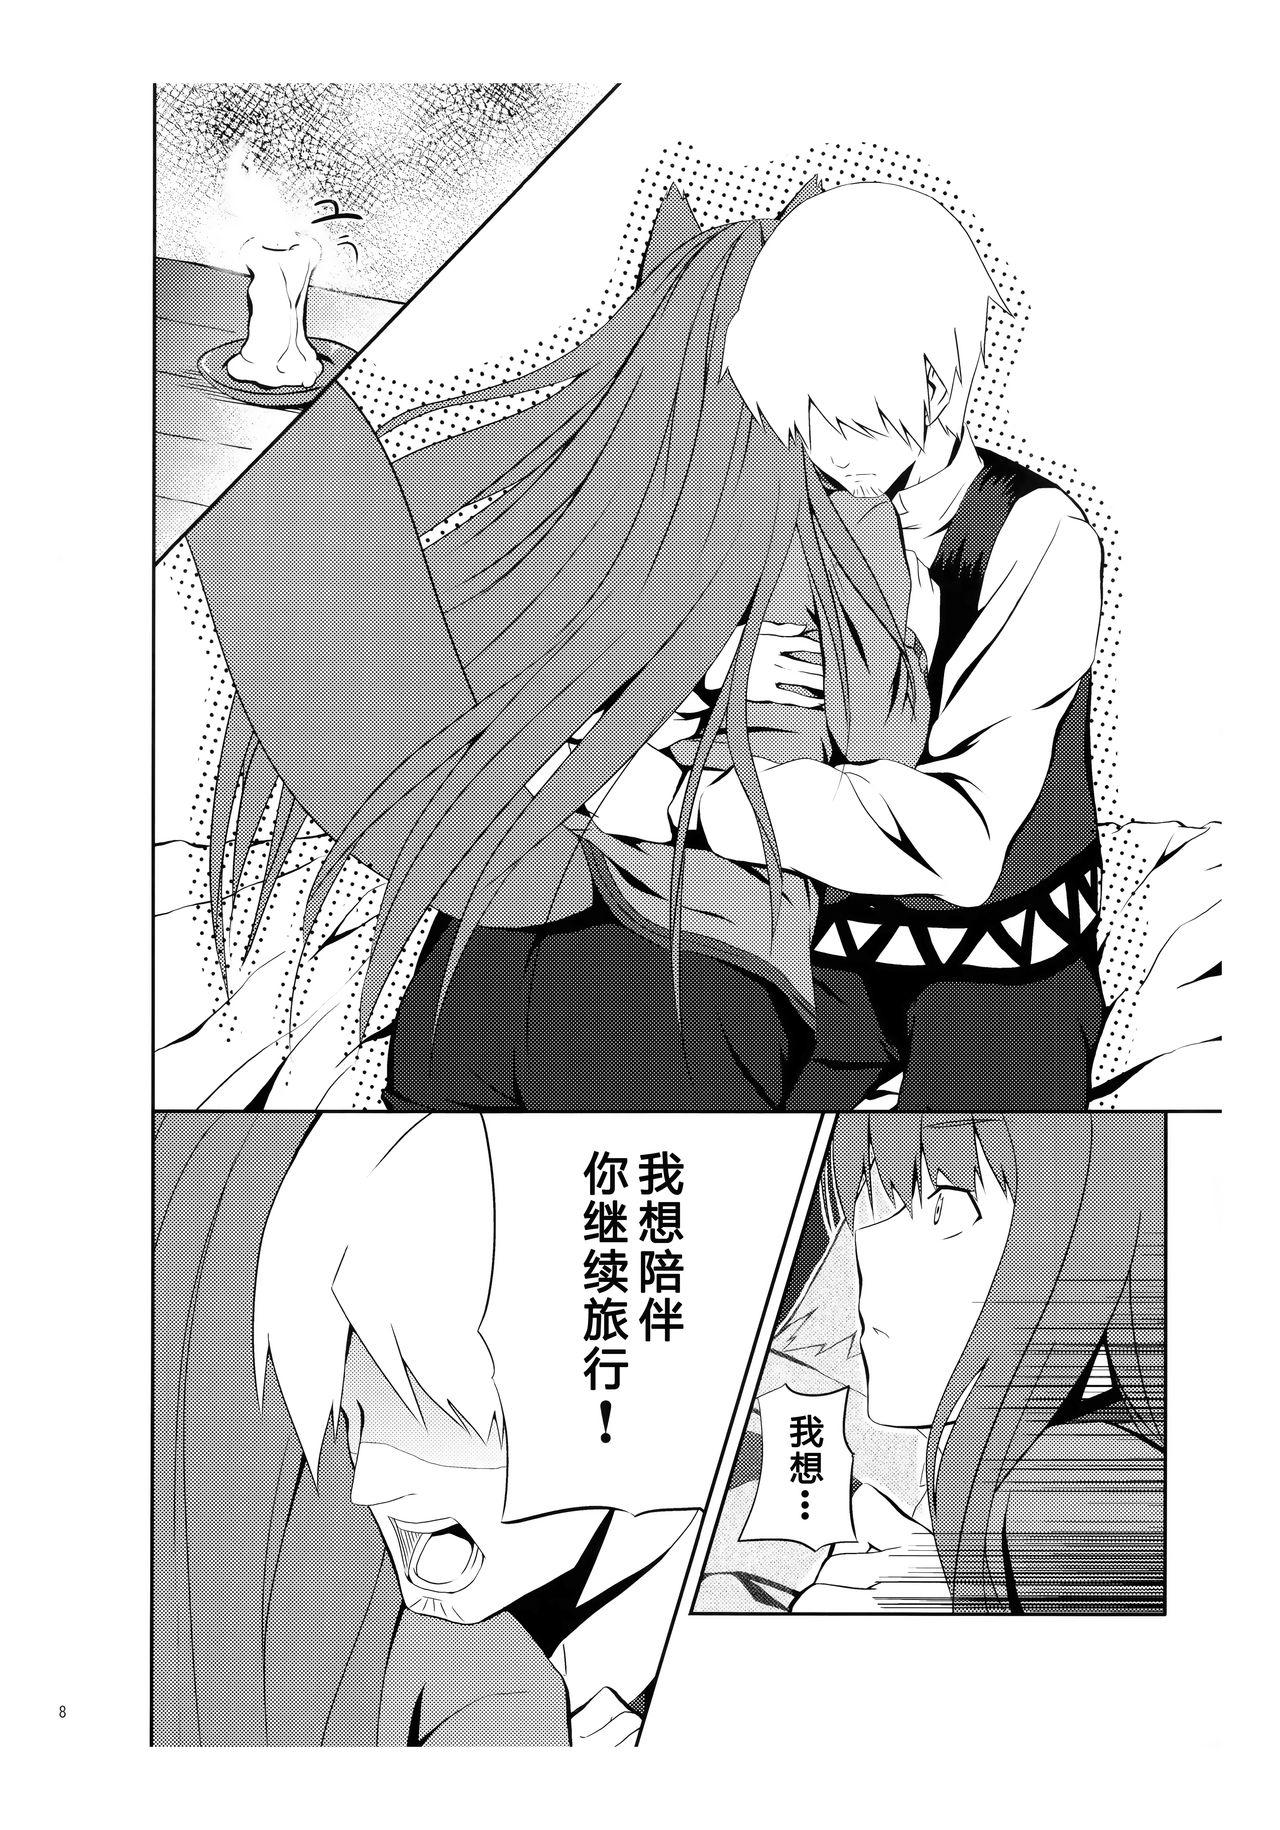 Masseuse Bitter Apple - Spice and wolf Deep - Page 9